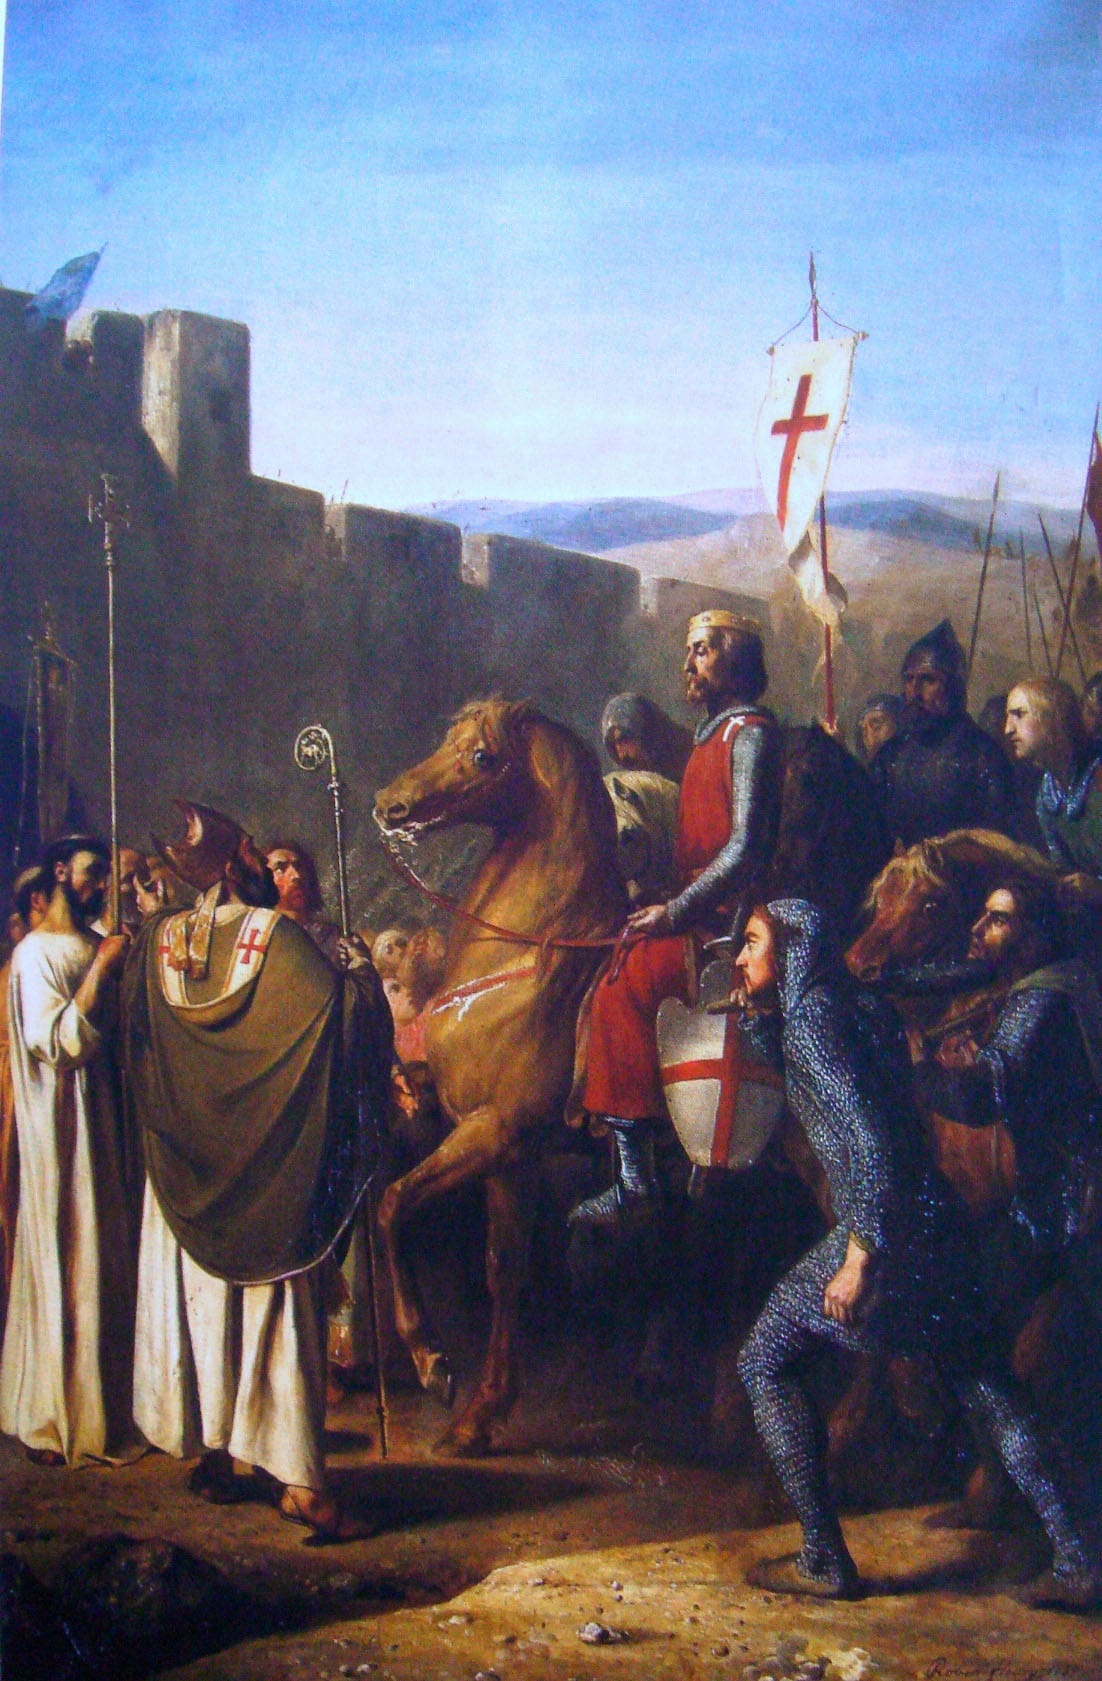 This is a painting featuring the Crusaders. A man, probably Richard the Lionheart, is featured horseback. Behind him is a white banner with a red cross. He is surrounded by knights in armor and Catholic-looking priests. They are about to invade a castle. There's a pretty blue sky above them.